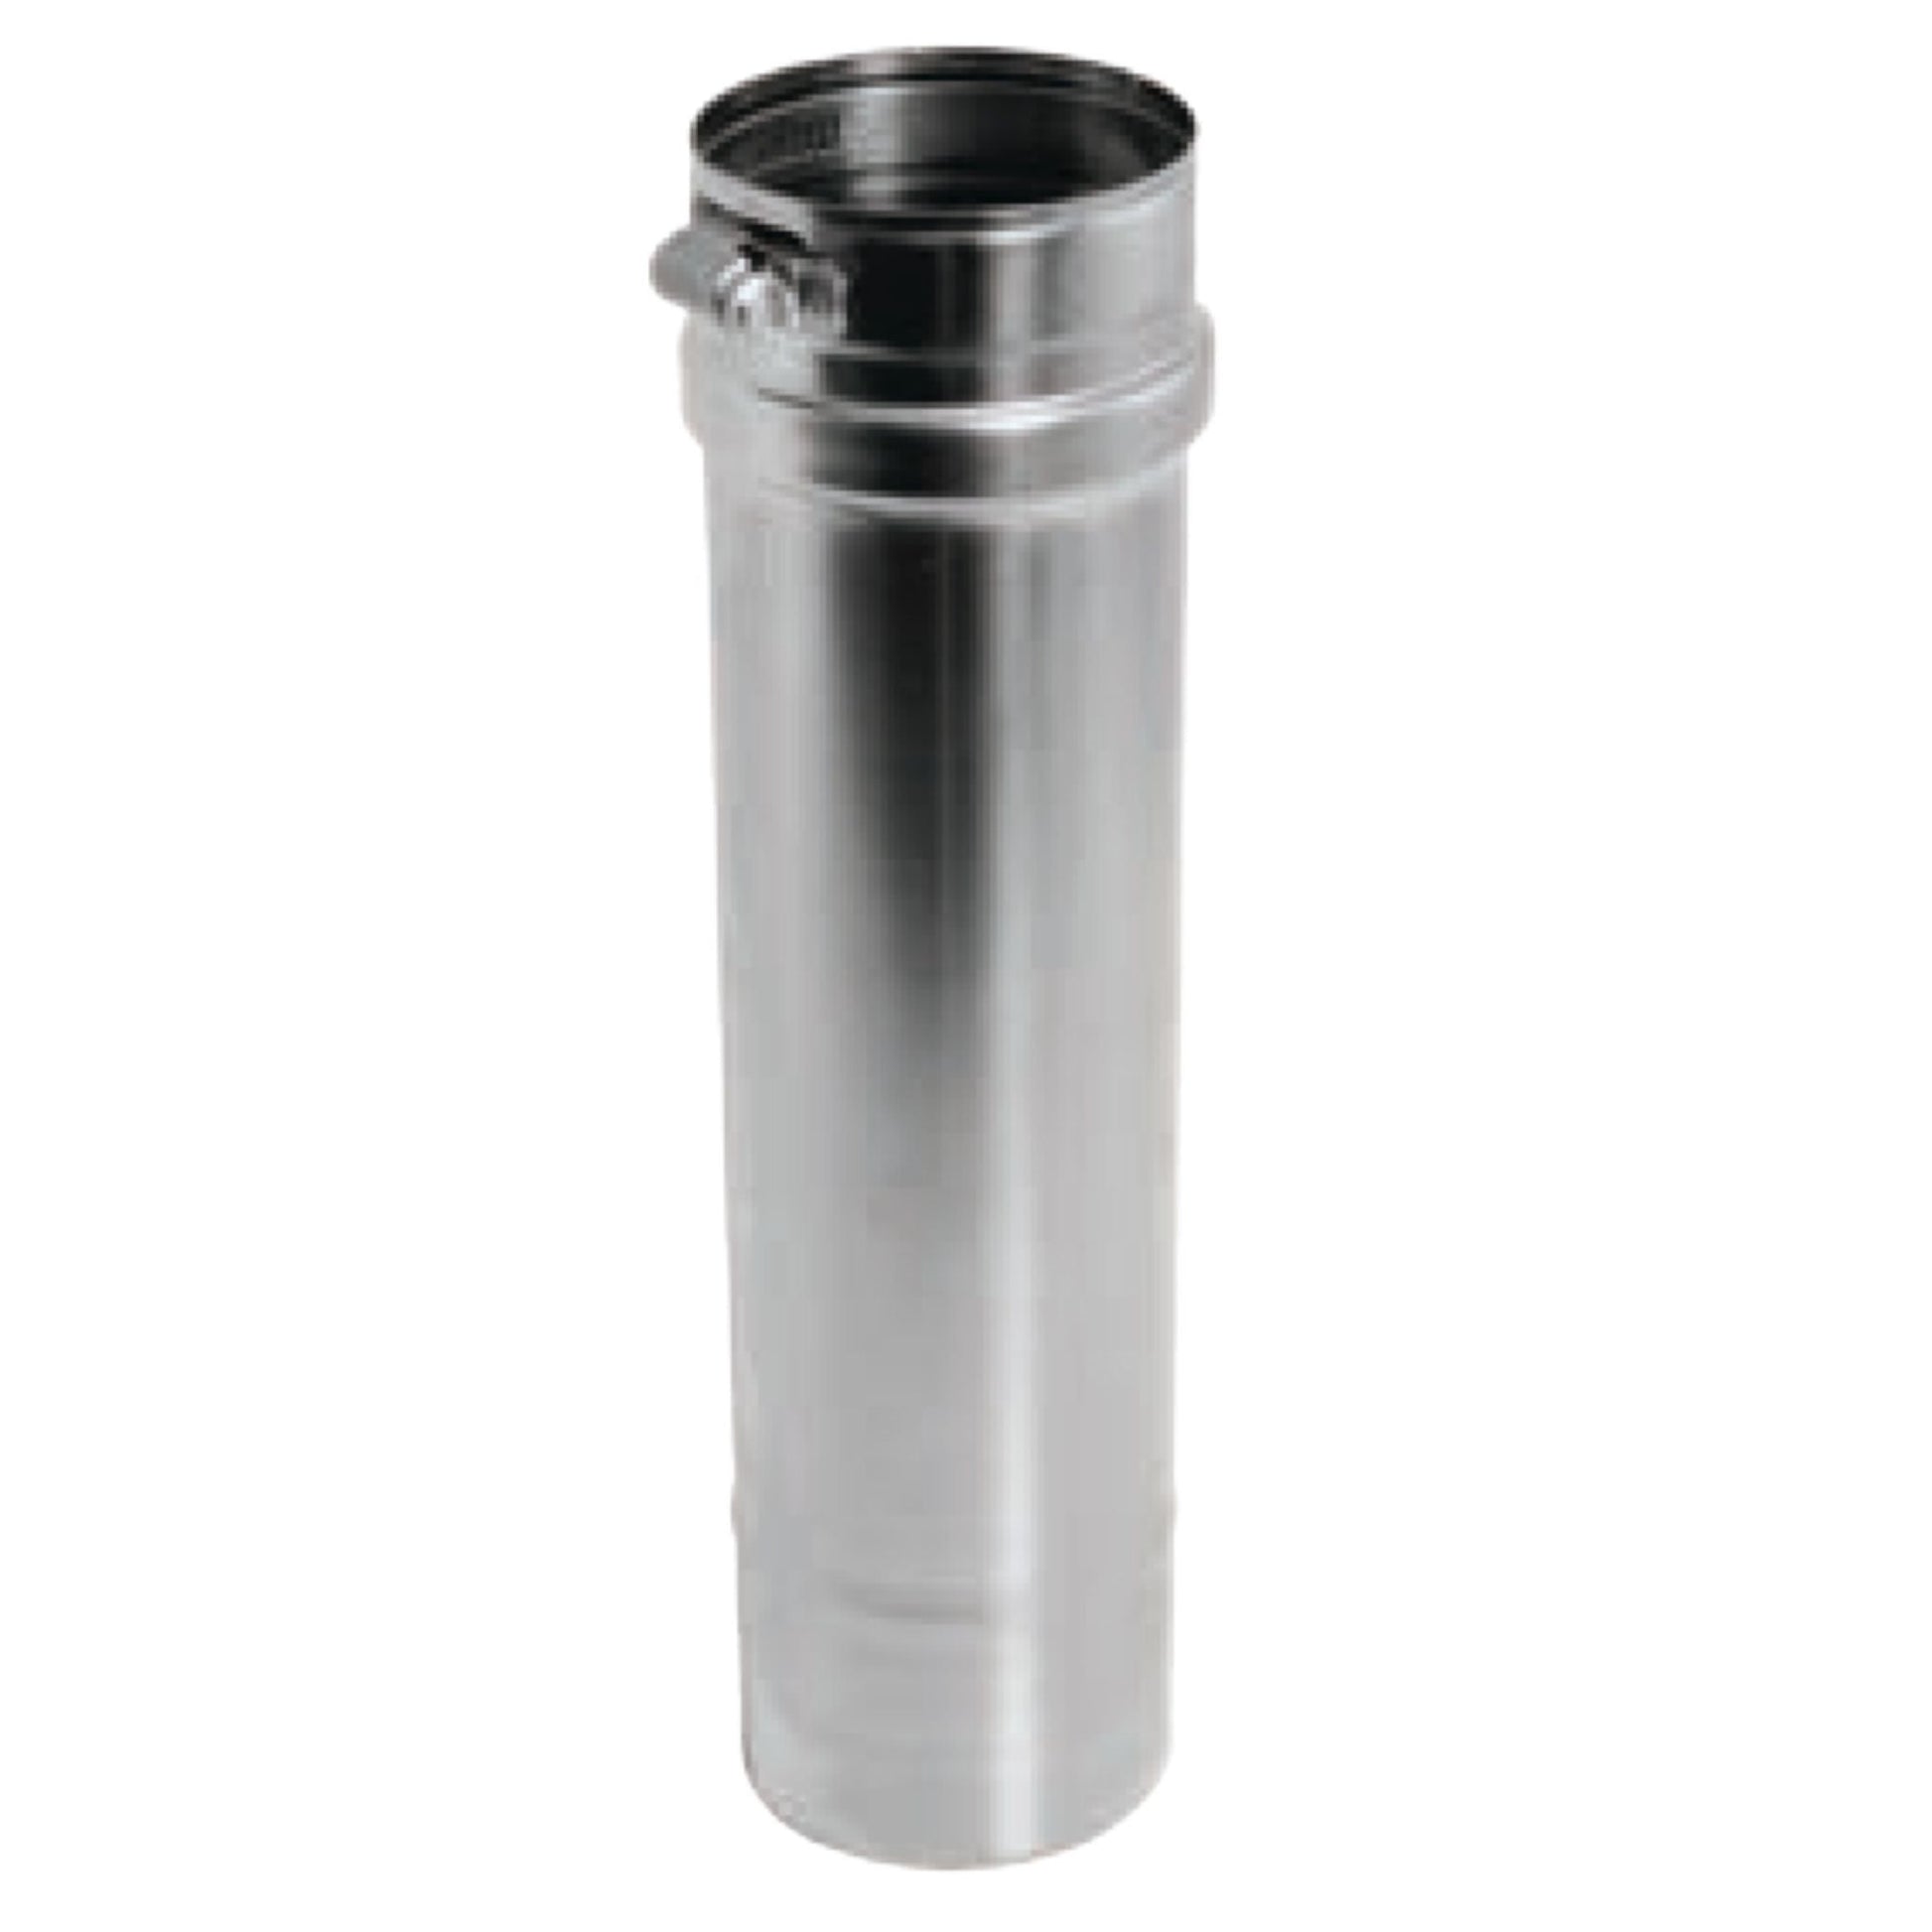 DuraVent FasNSeal 8" x 24" 316L Stainless Steel Vent Length